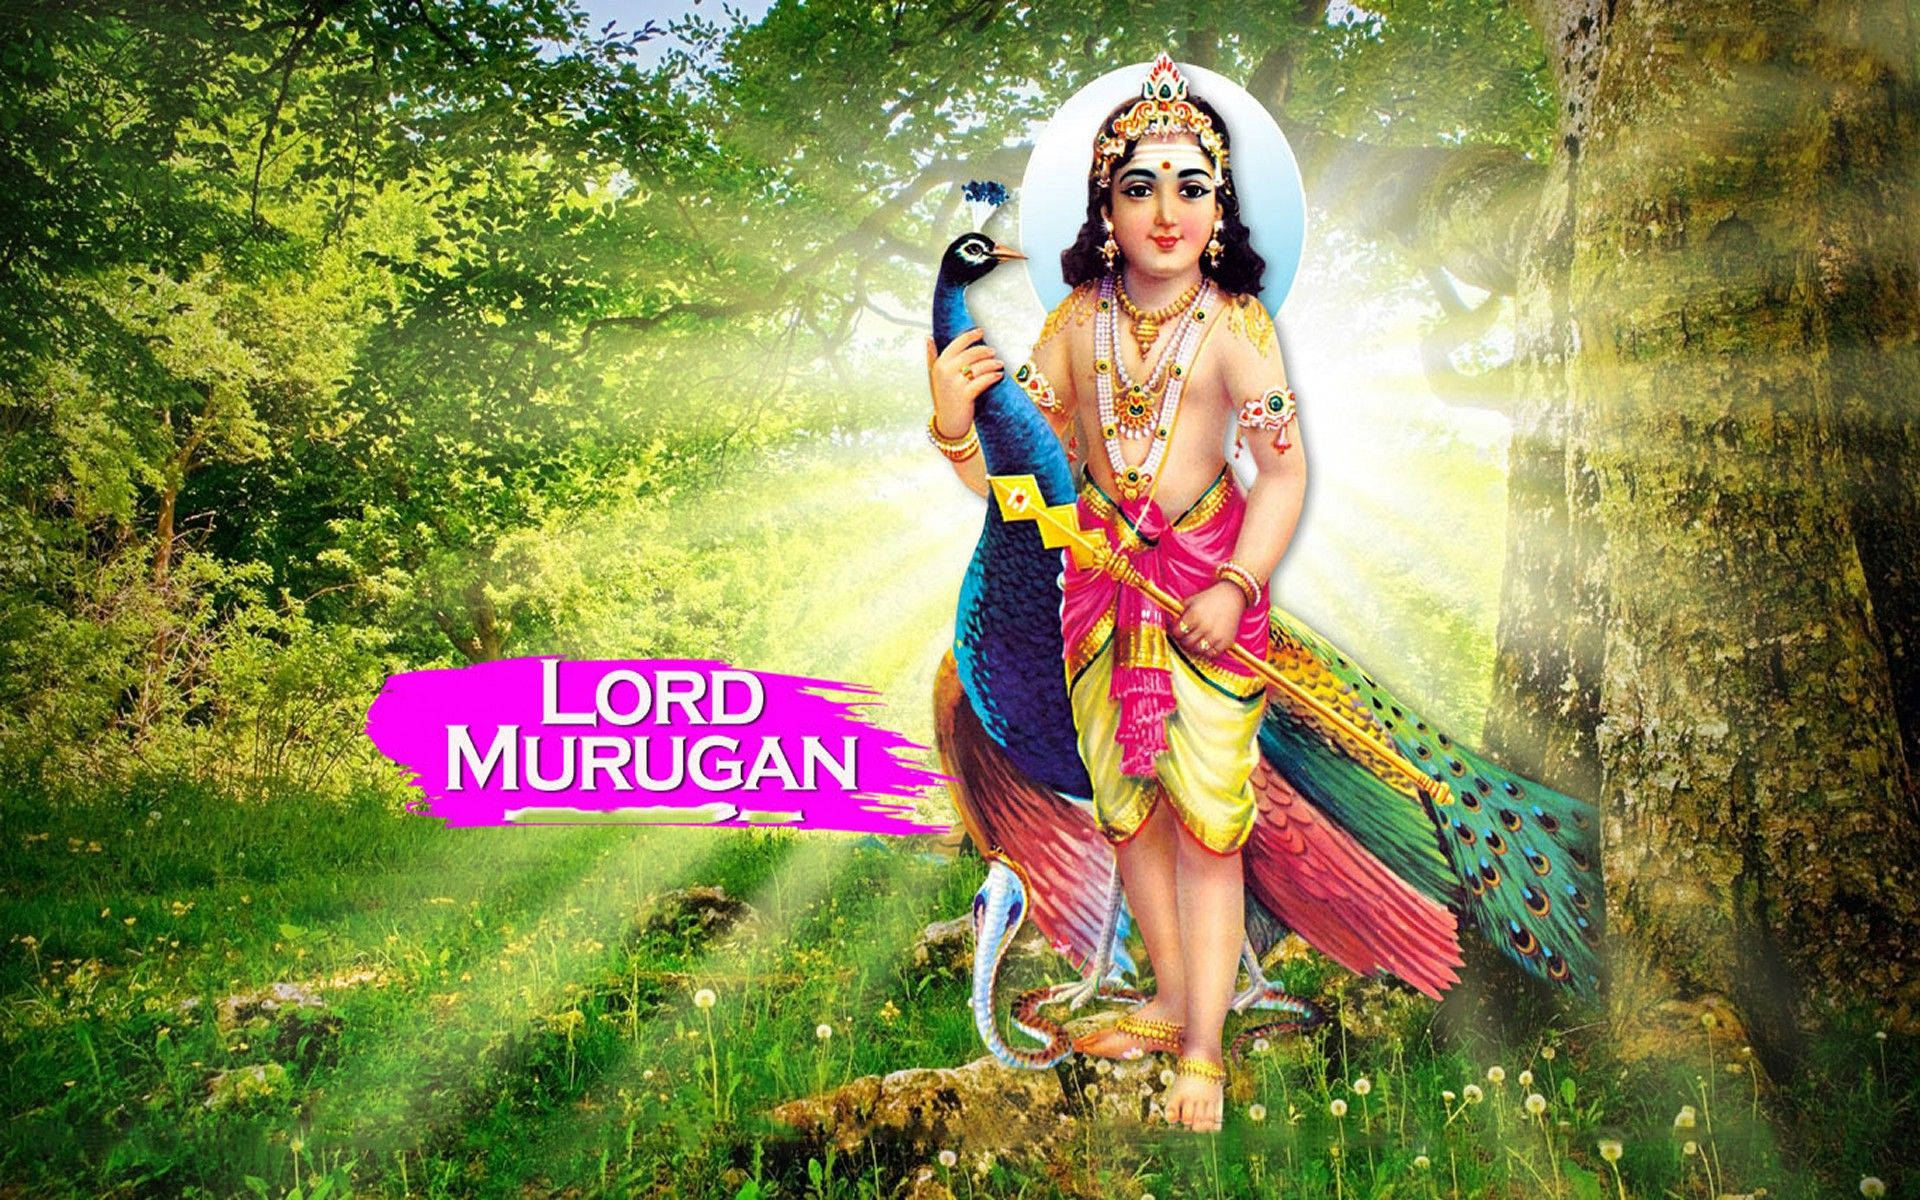 Murugan With Peacock In Forest Background